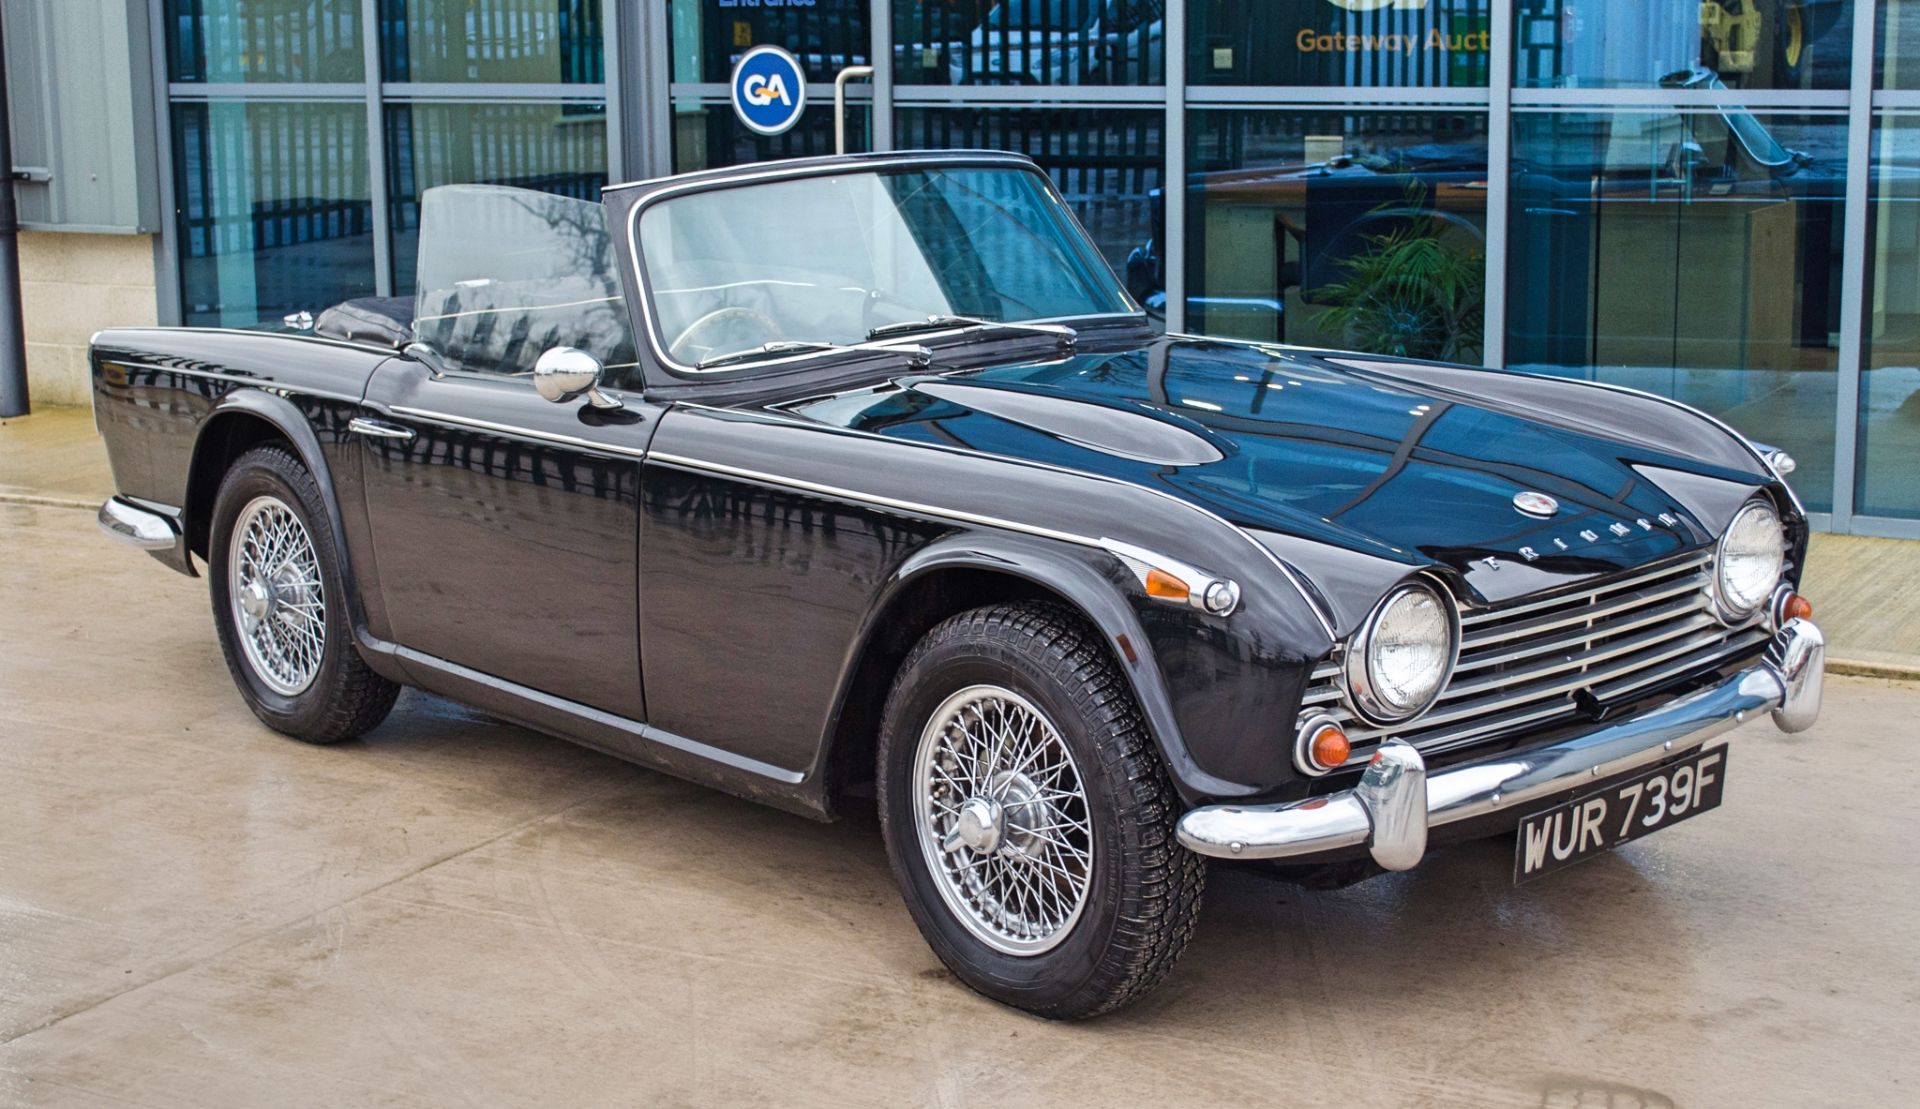 1967 Triumph TR4A IRS 2135cc convertible - Image 2 of 56